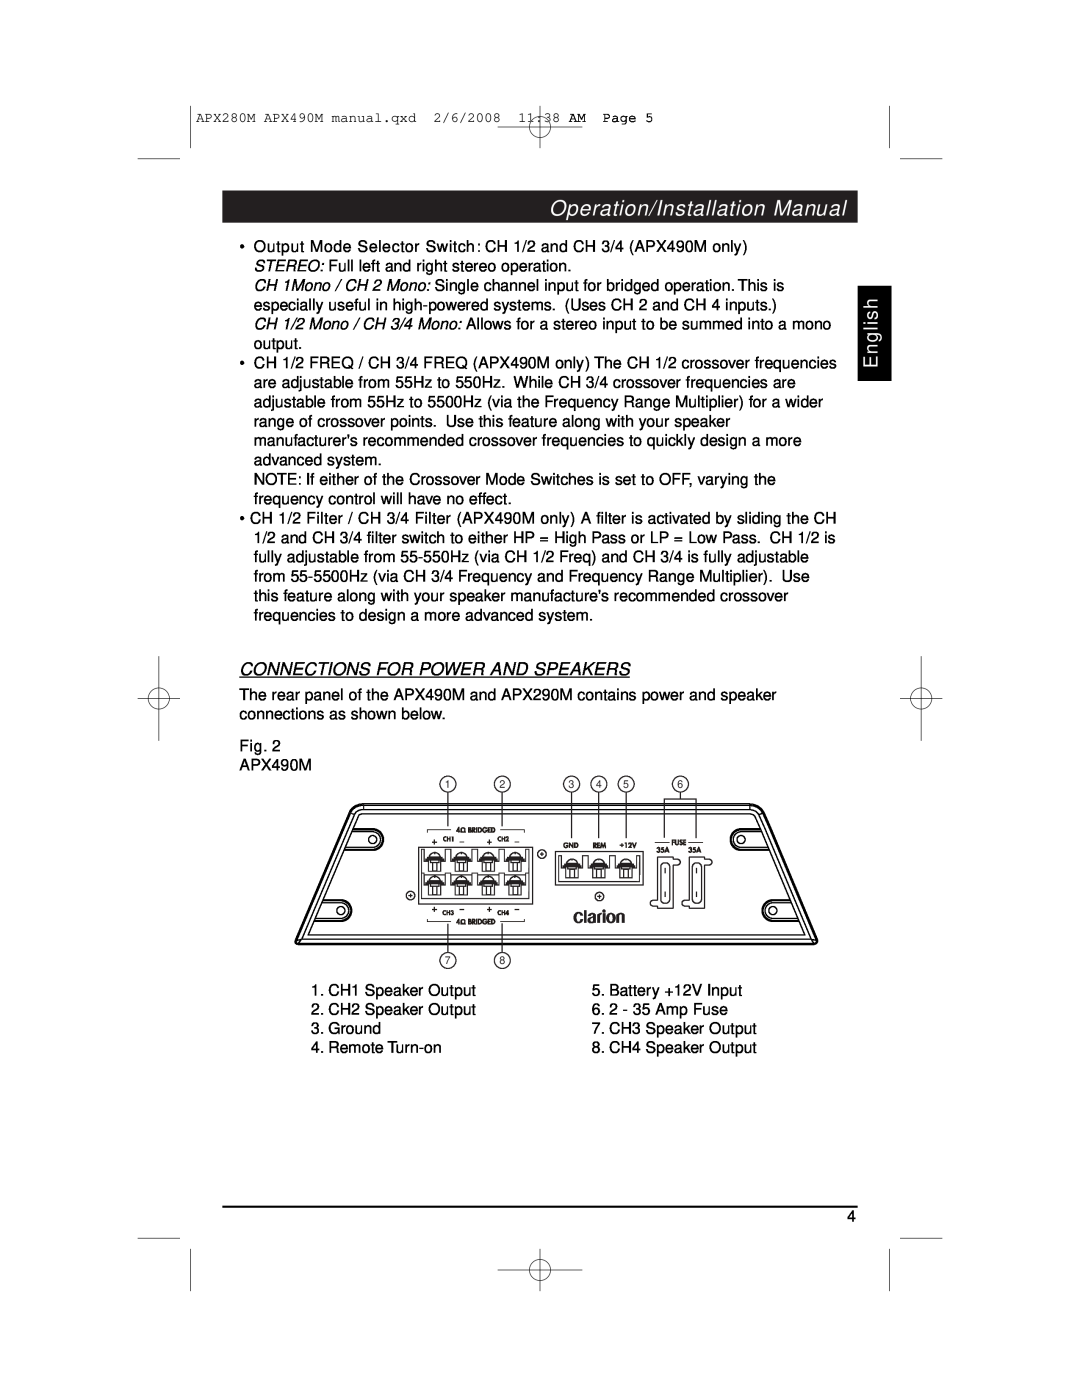 Clarion APX290M installation manual Connections For Power And Speakers, Operation/Installation Manual, English 